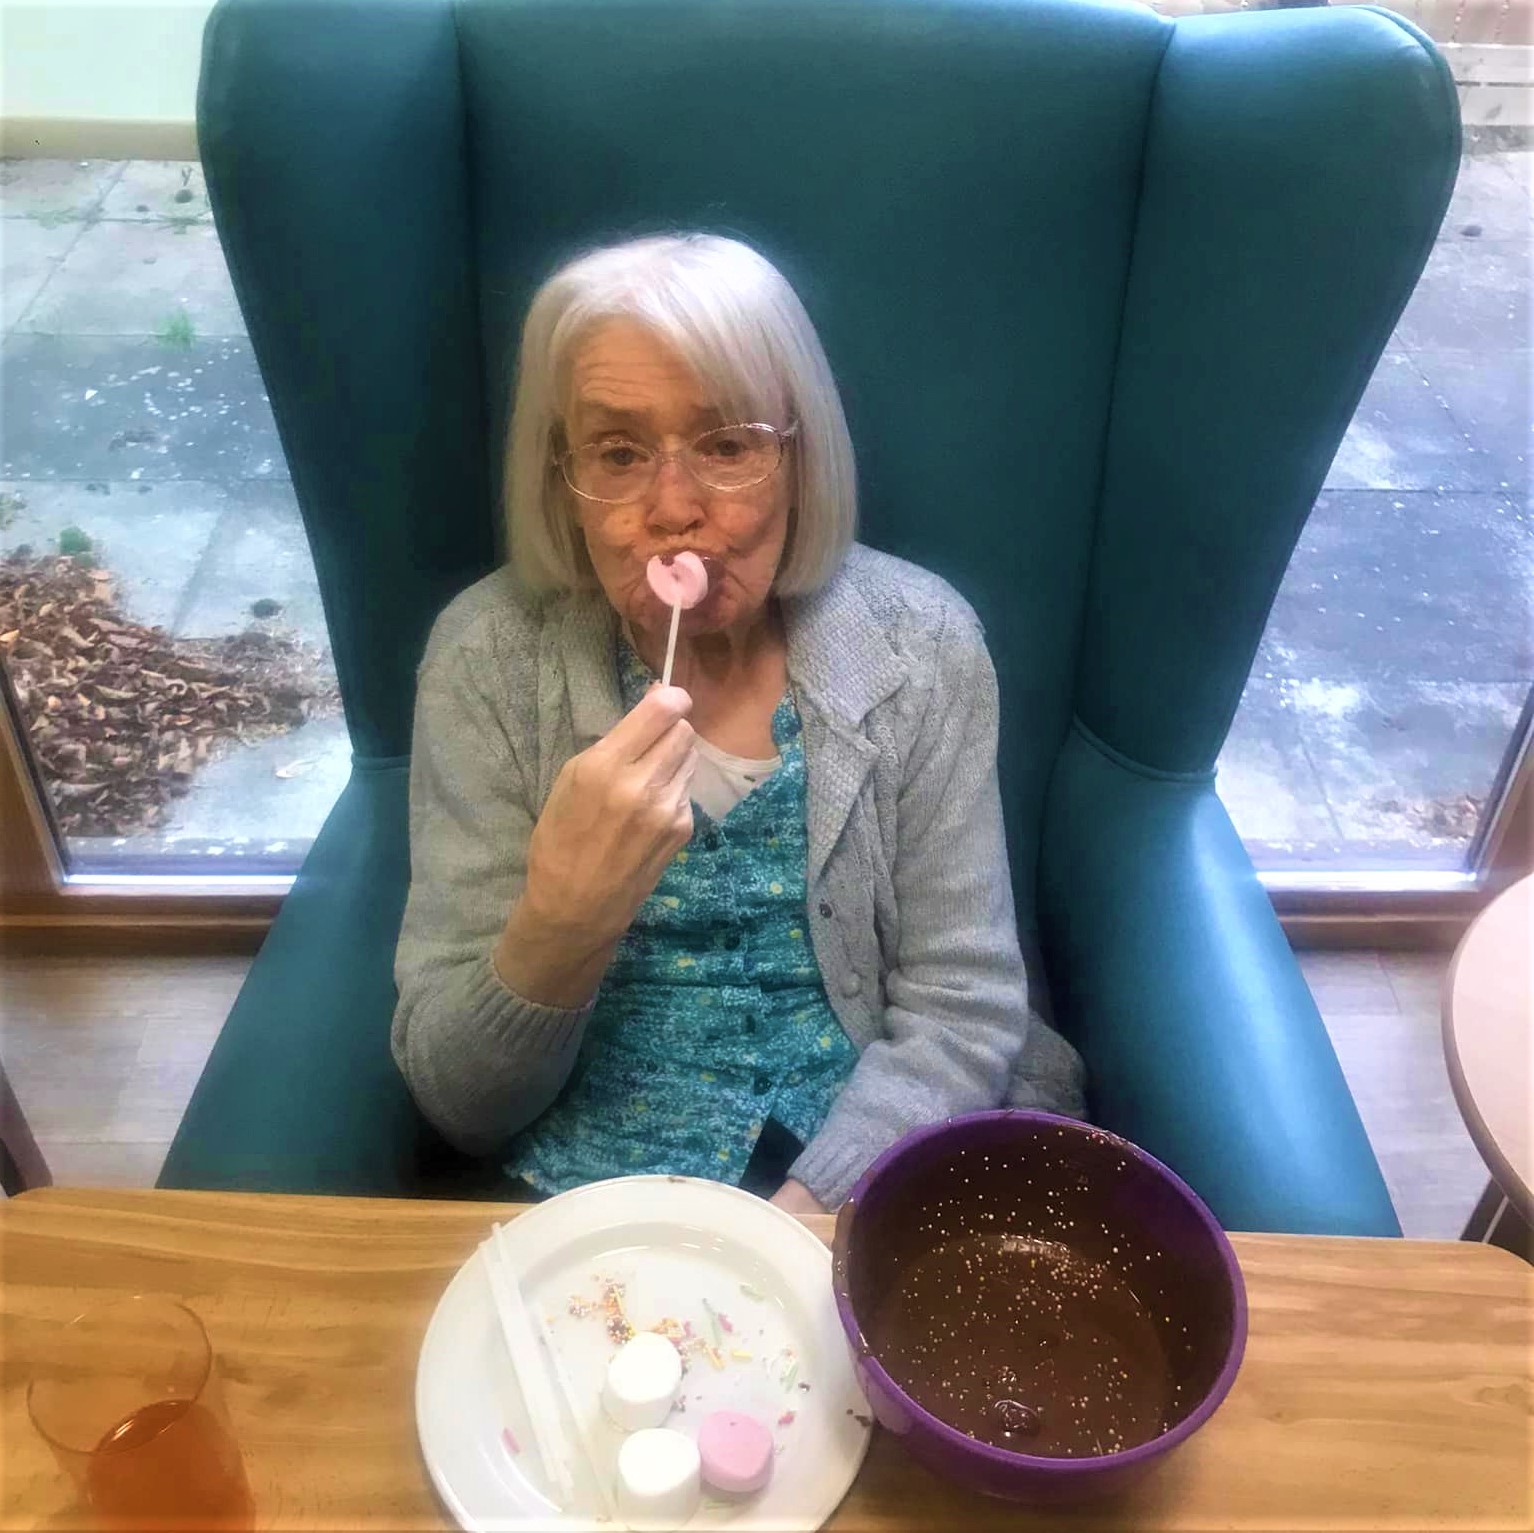 REsident eating dipping sweets for melted chocolate